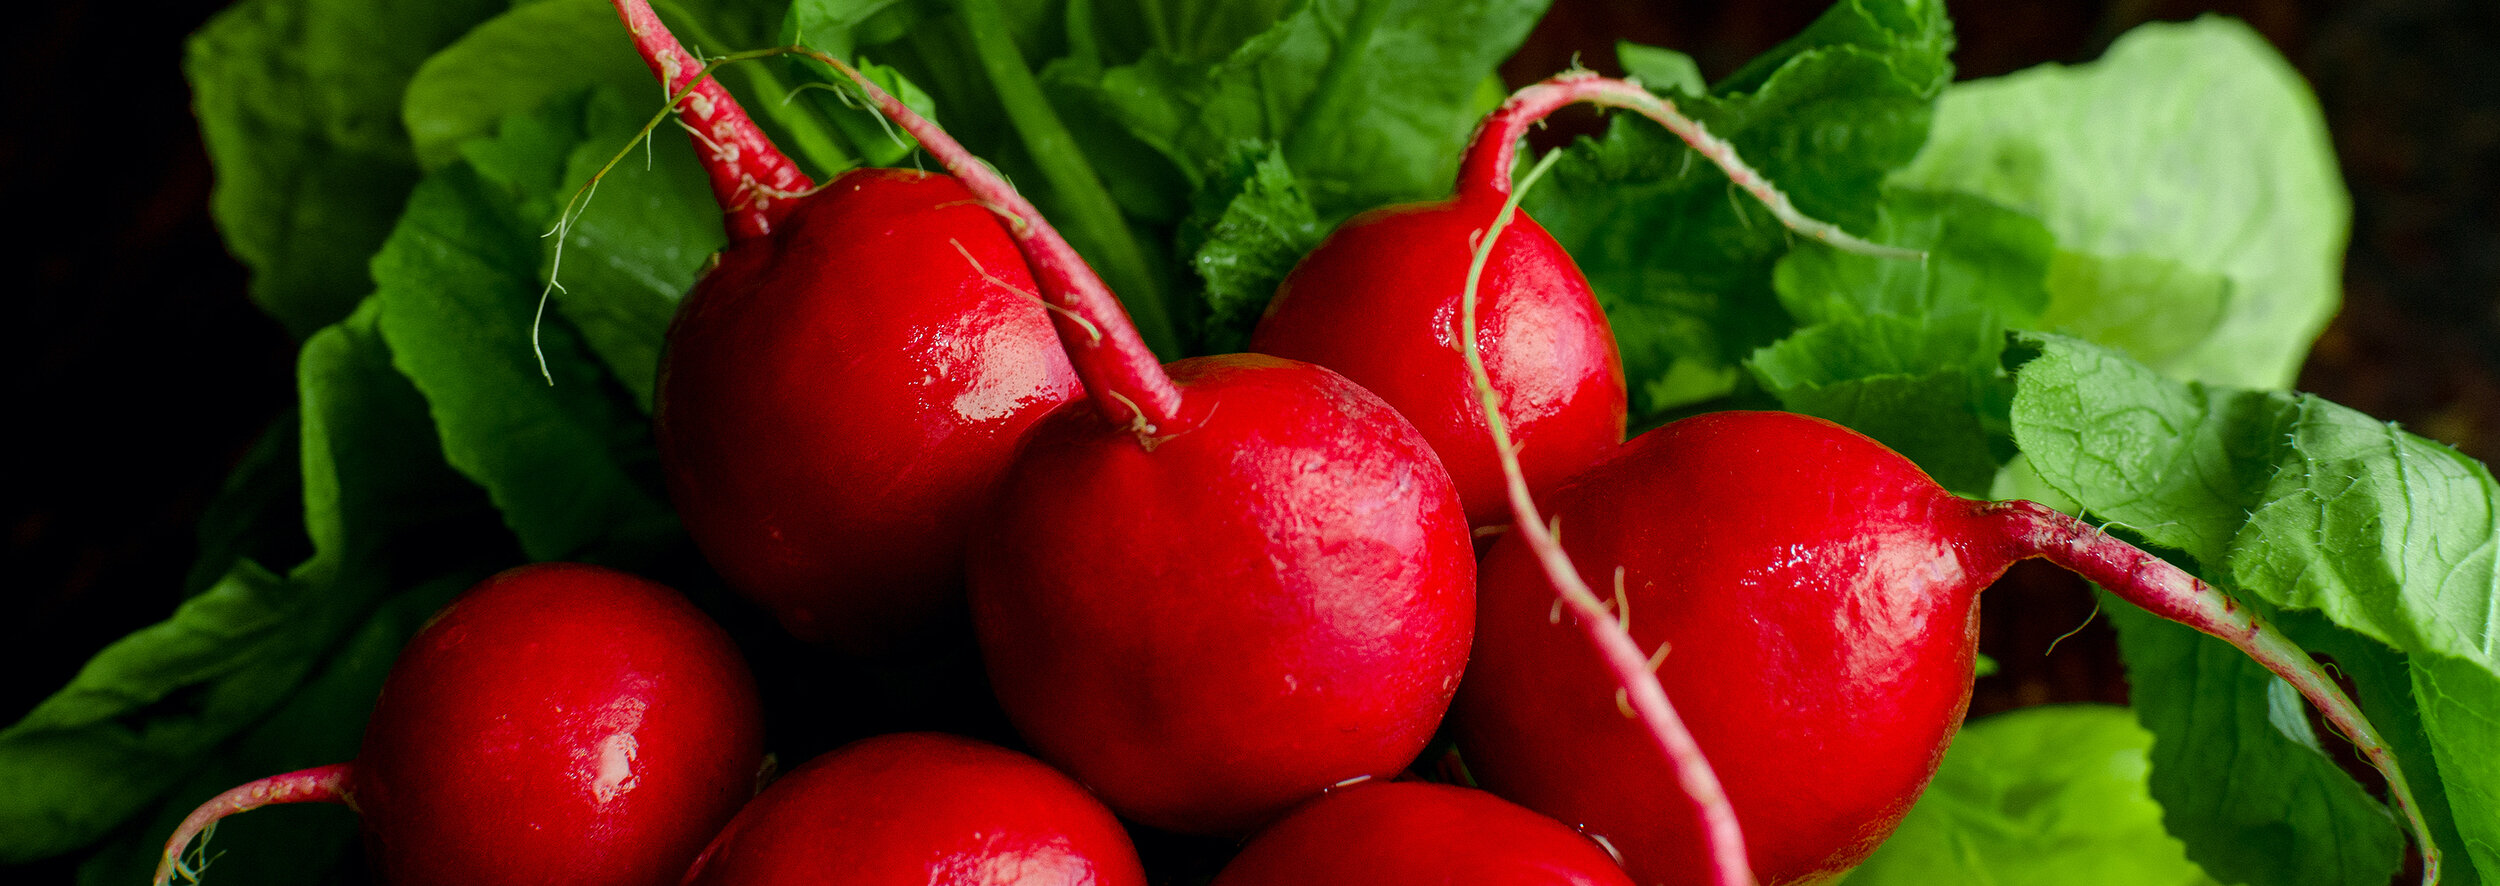 bigstock-A-Bunch-Of-Radishes-With-Green-403998008.jpg